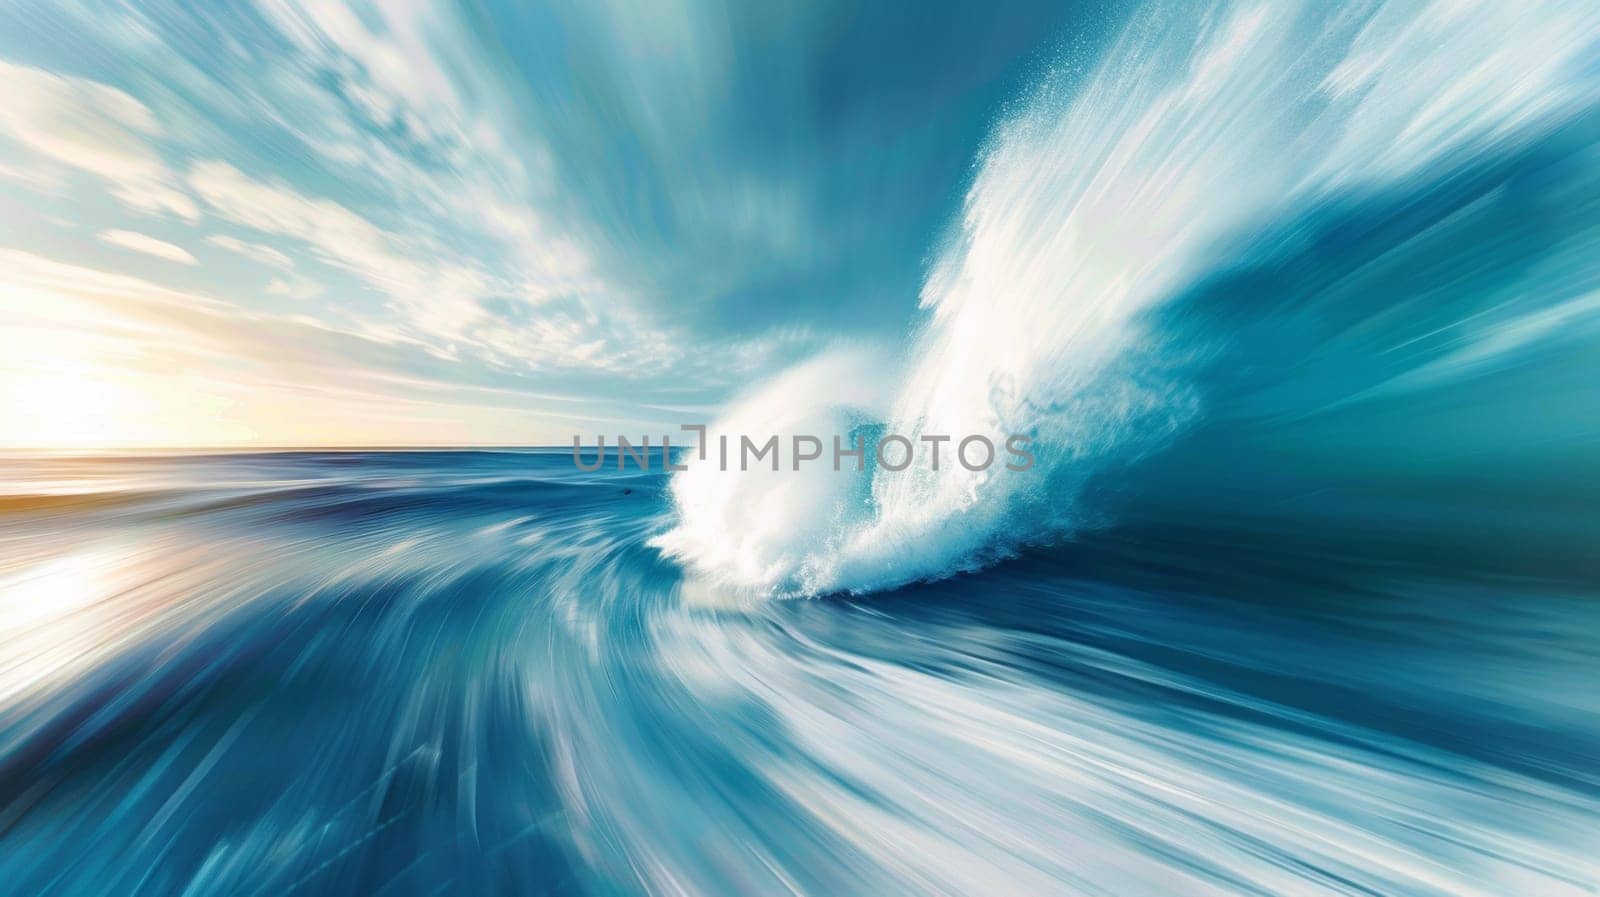 A large wave crashing into the ocean in a blurry photo